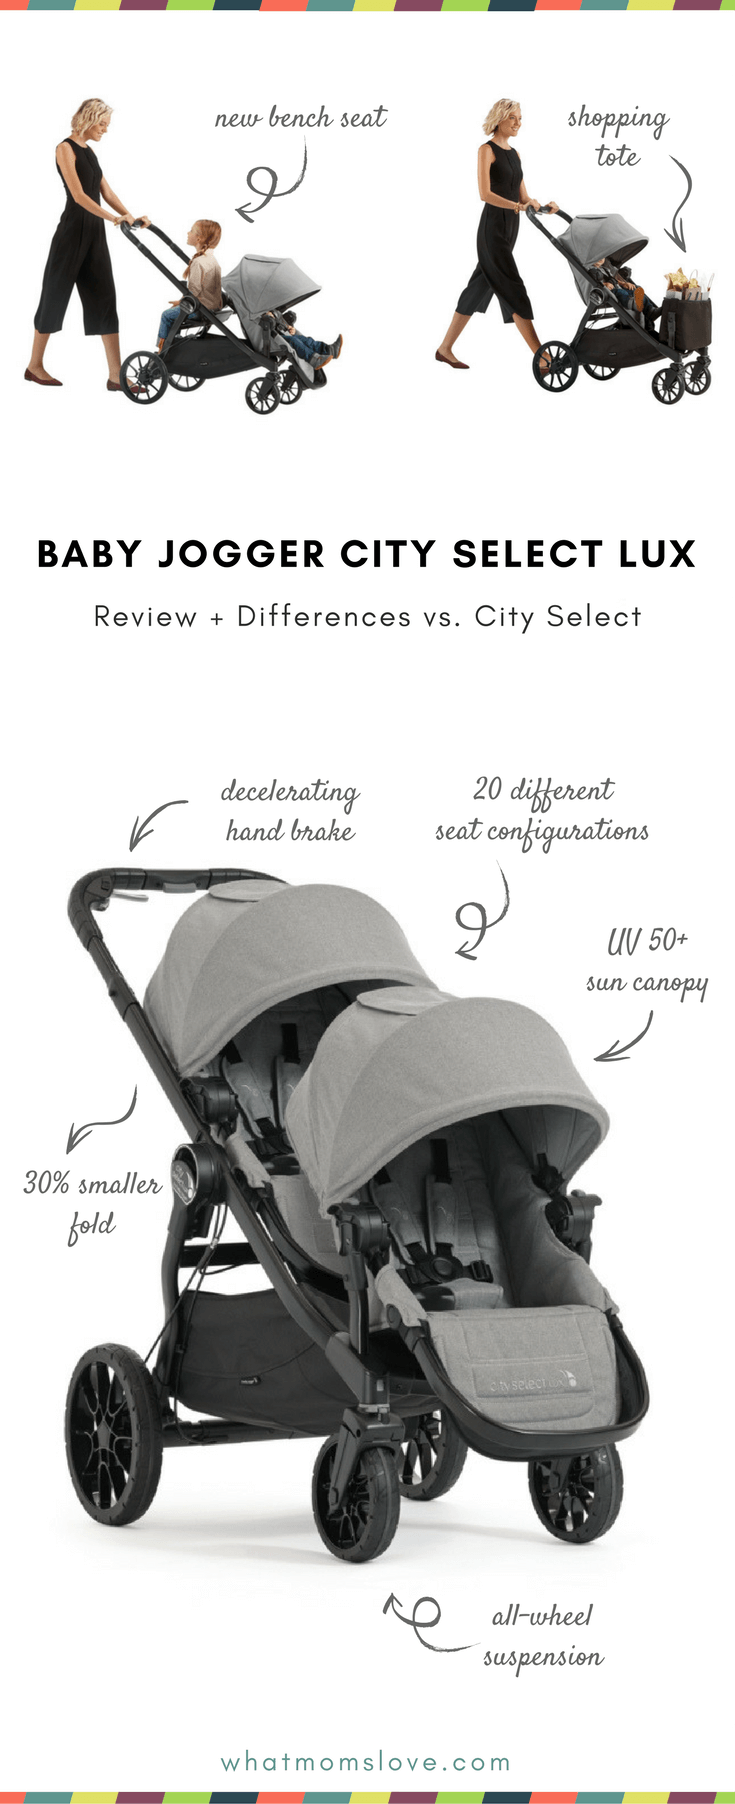 city select lux accessories